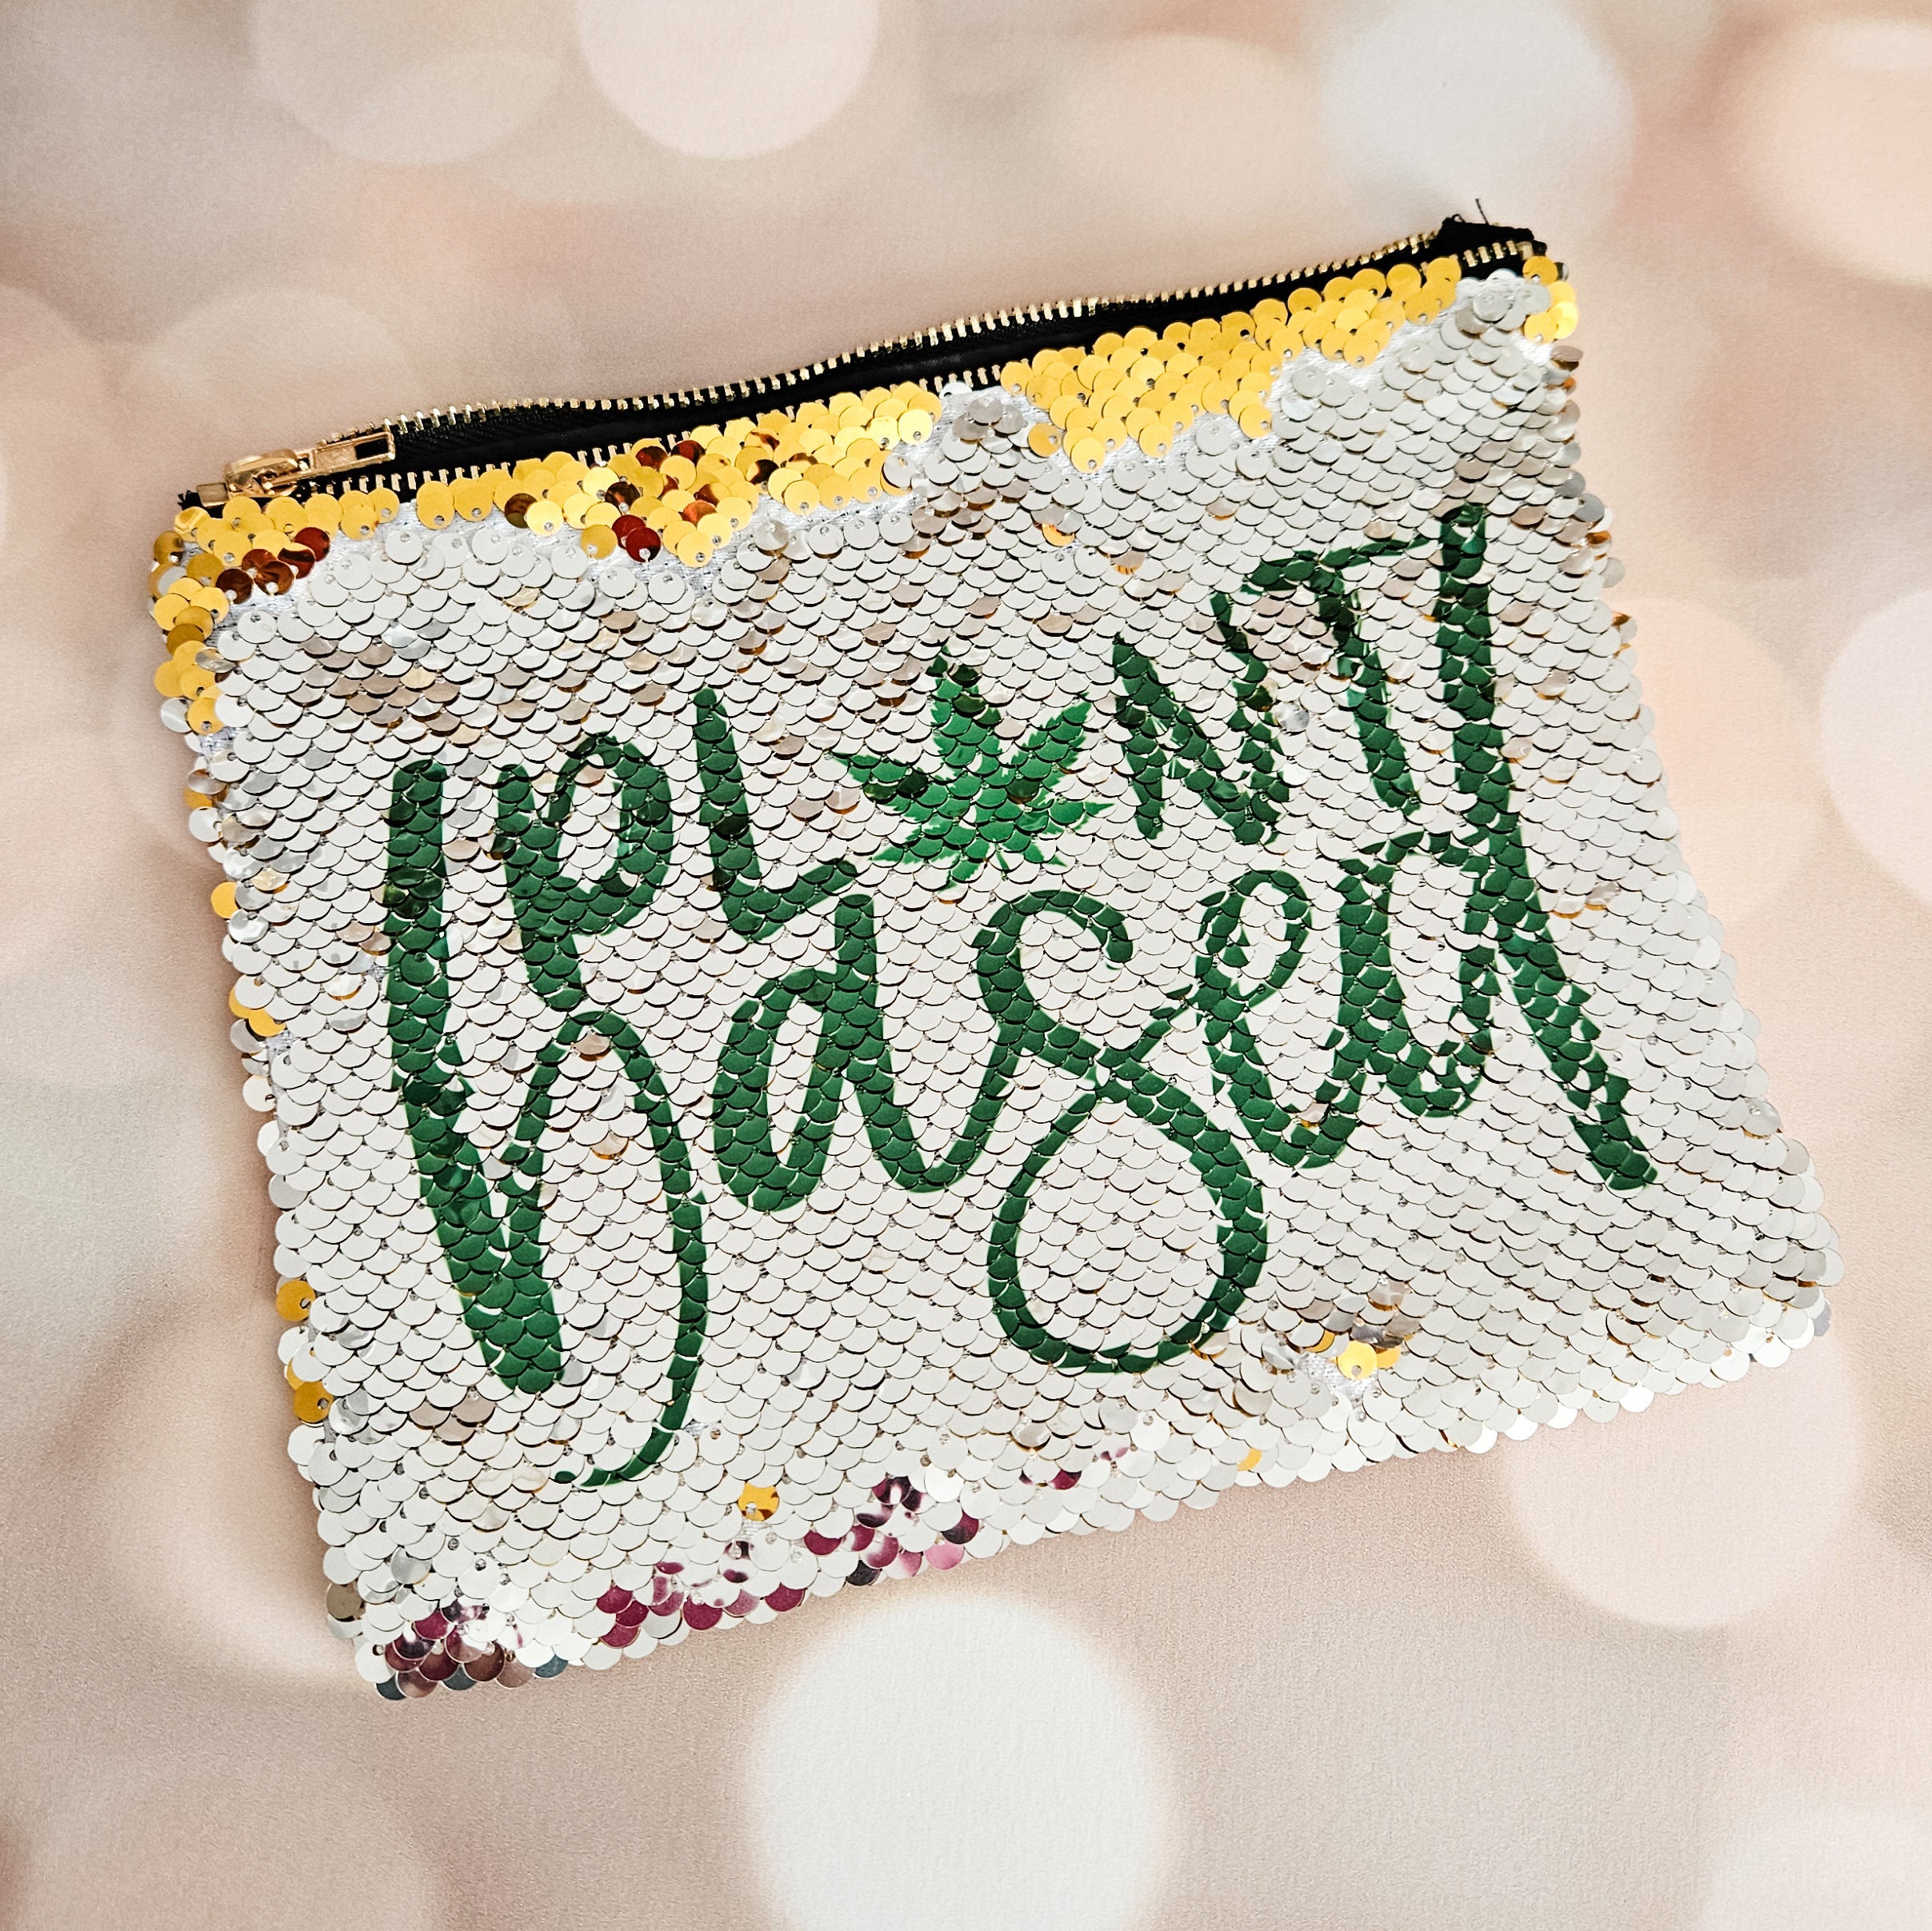 Plant Based 420 Sequin Cosmetic Case - Funny Weed Storage Pouch for Vegan Friend Salt and Sparkle